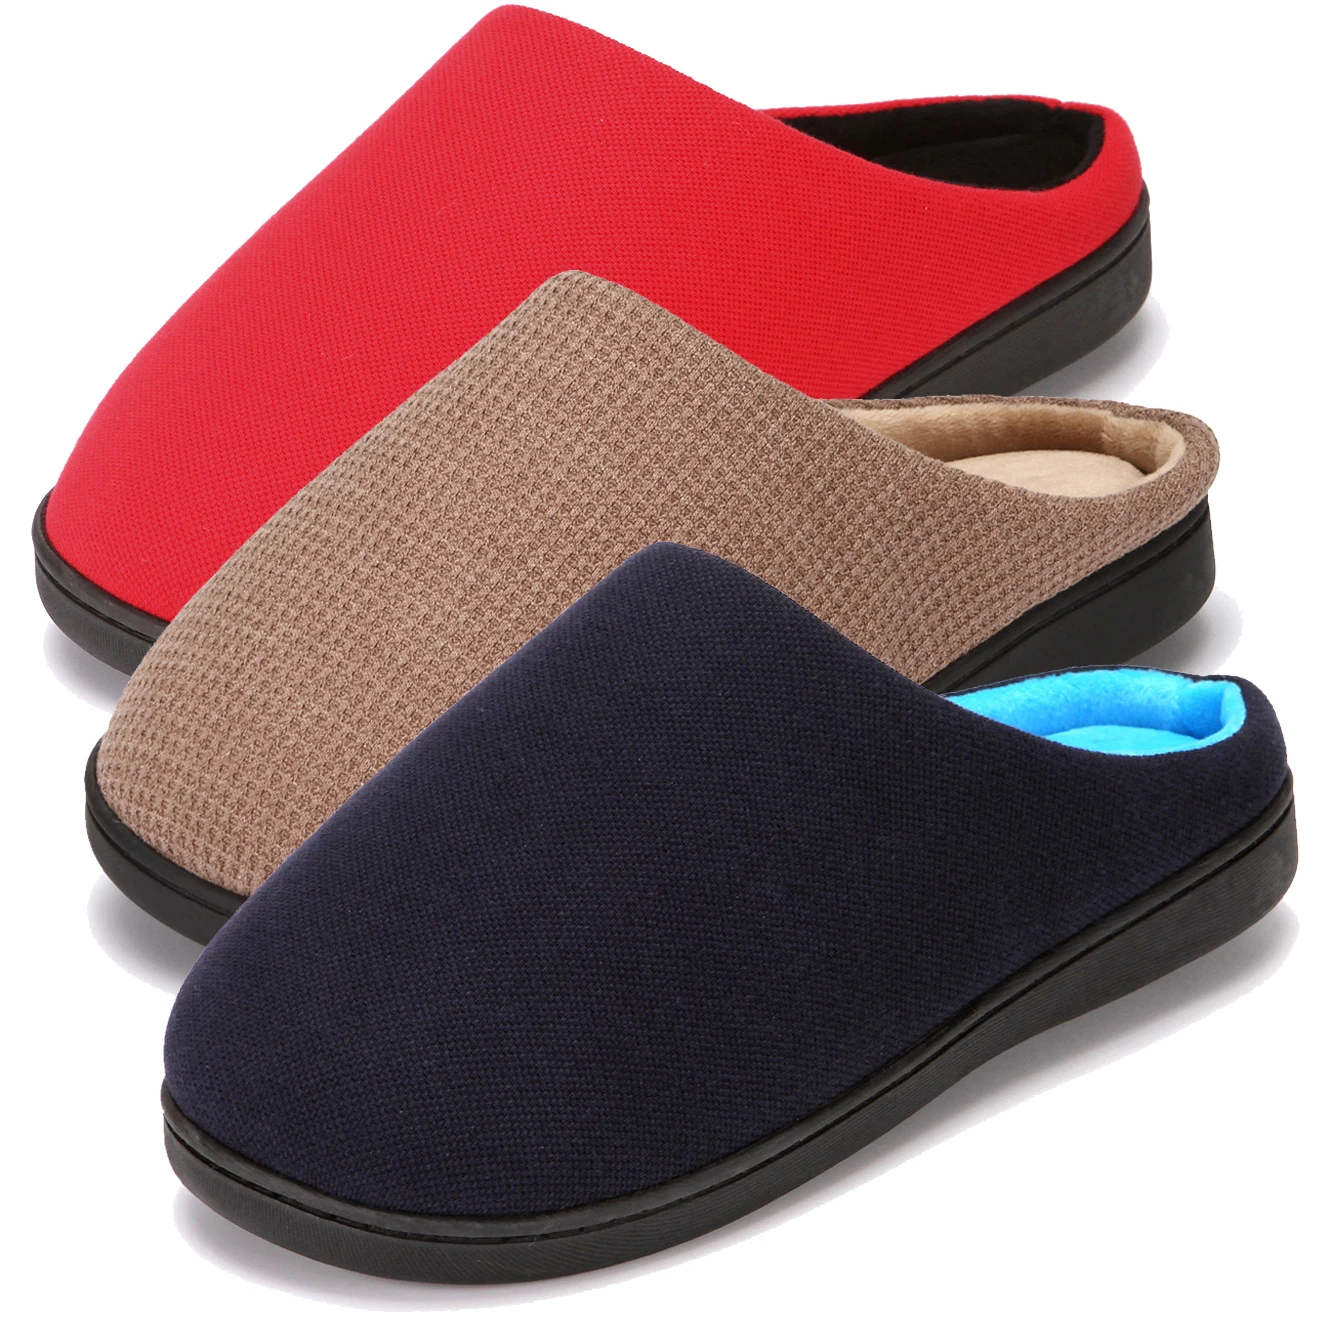 

High Quality Memory Foam Two-Tone Coral Fleece Lined Clog Scuff House Shoes Indoor & Outdoor Winter Shoes Women Men Slippers, Blue,brown,red